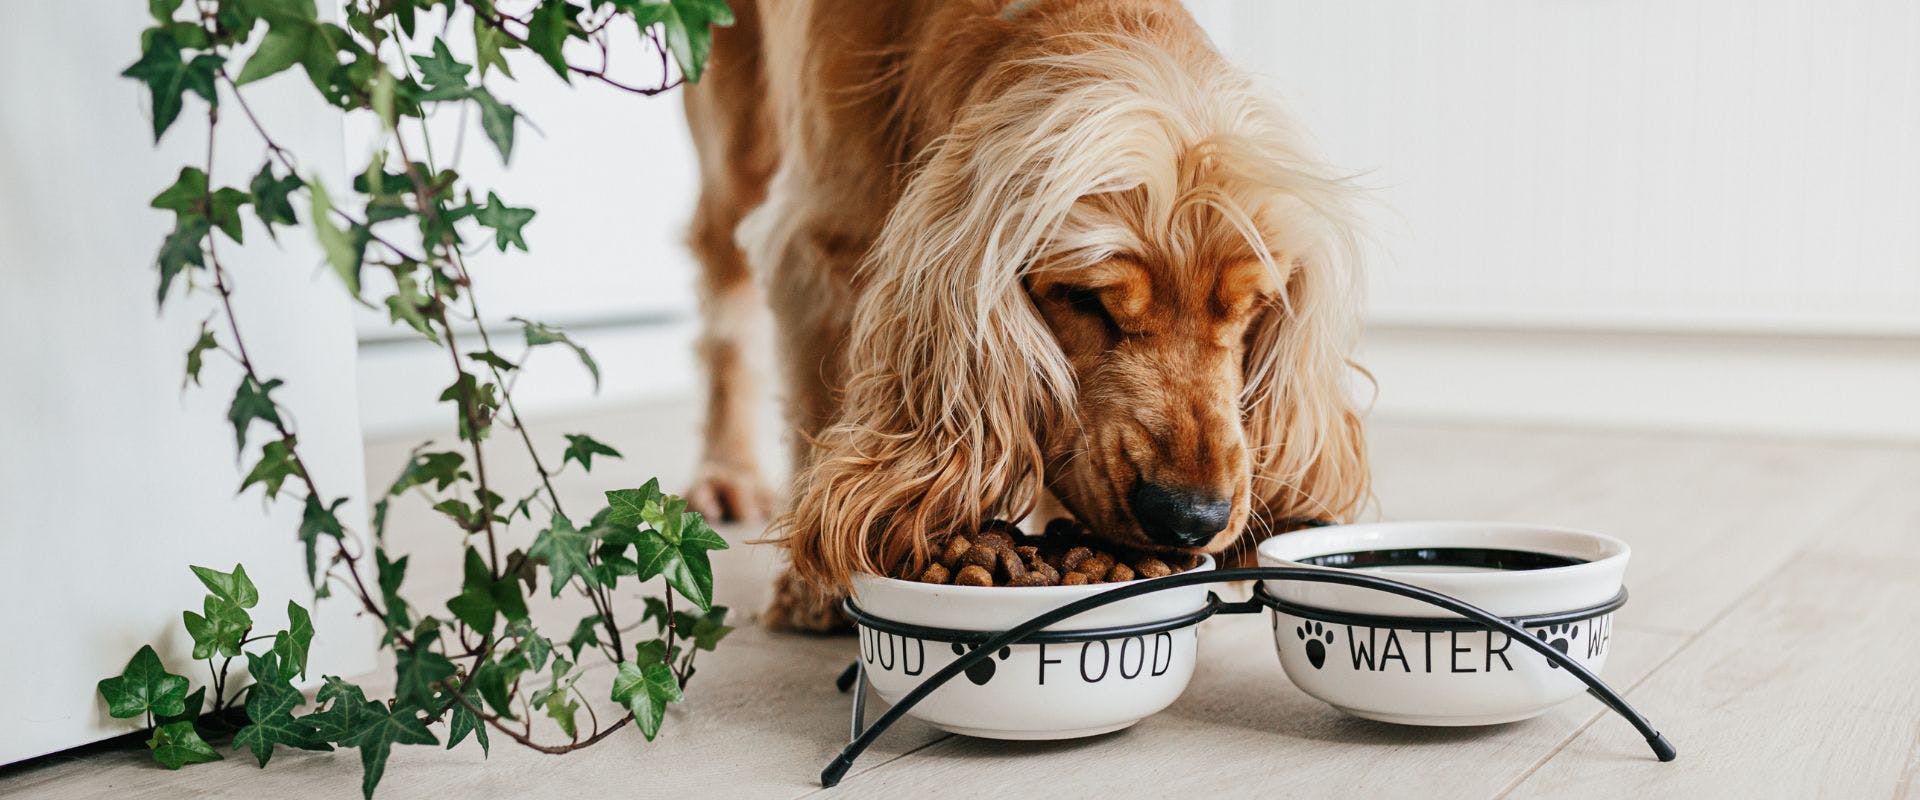 Spaniel dog eating from bowl